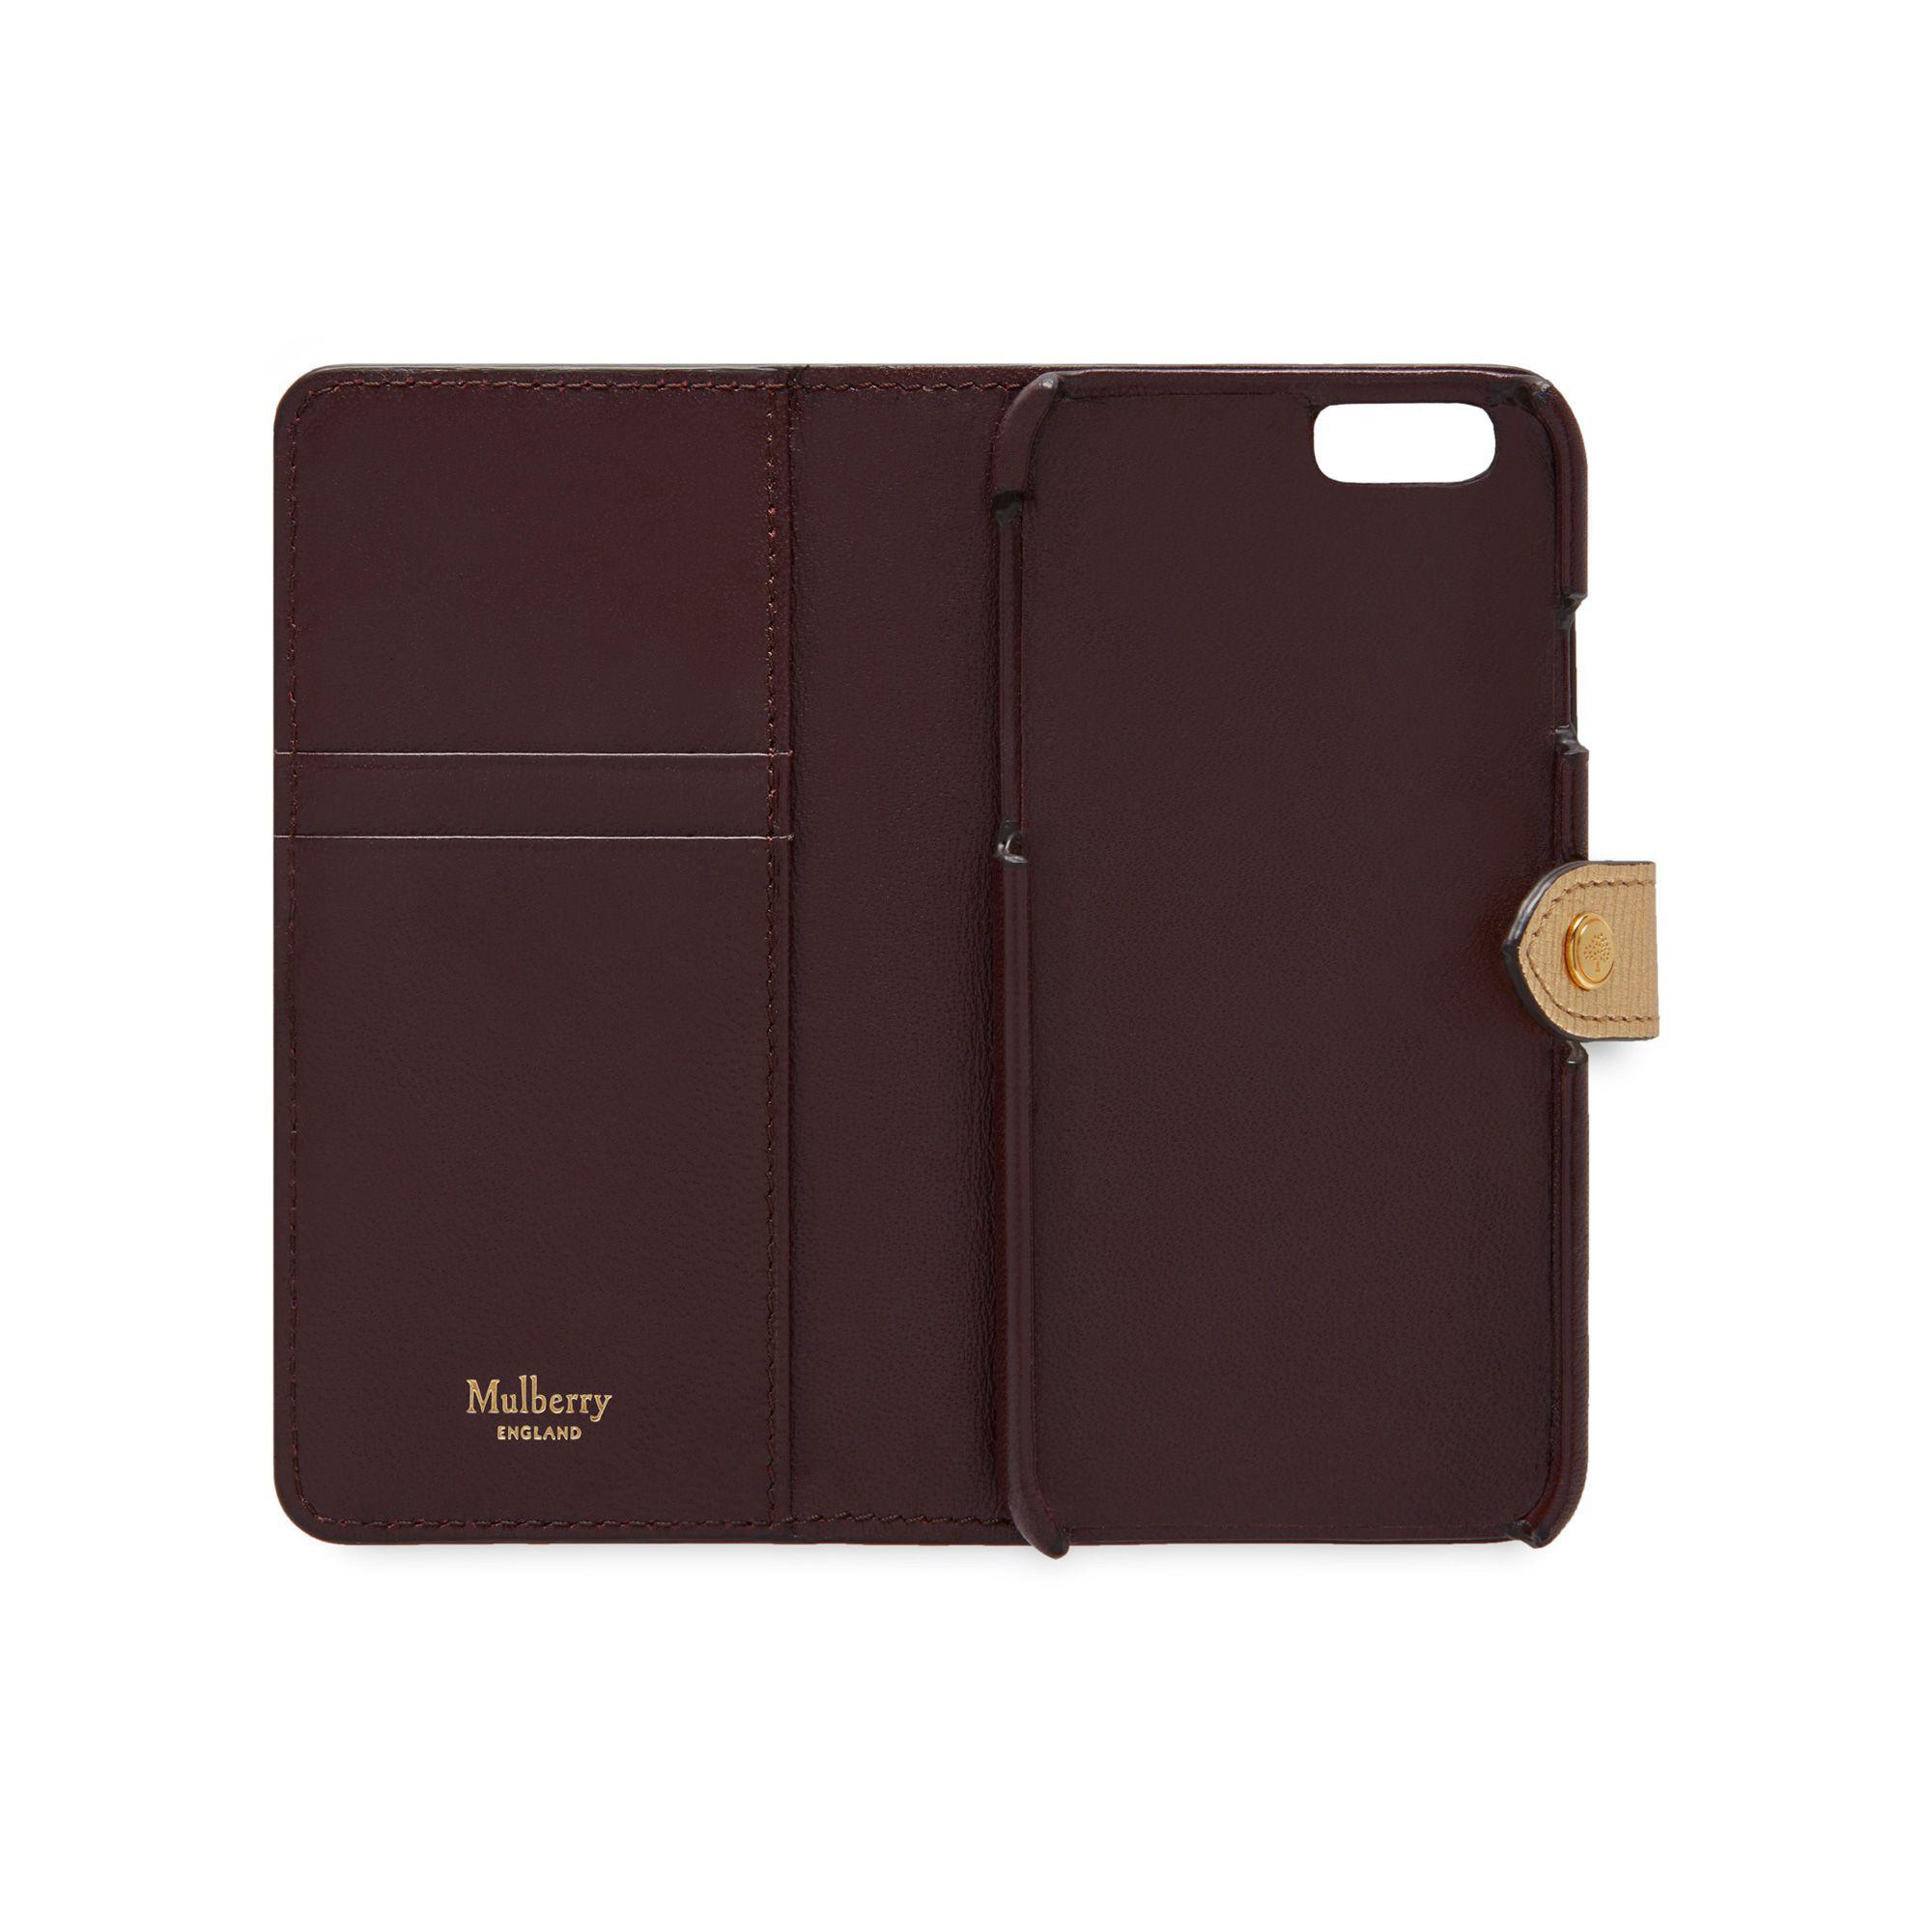 Mulberry Leather Iphone Flip Case in Gold (Metallic) | Lyst